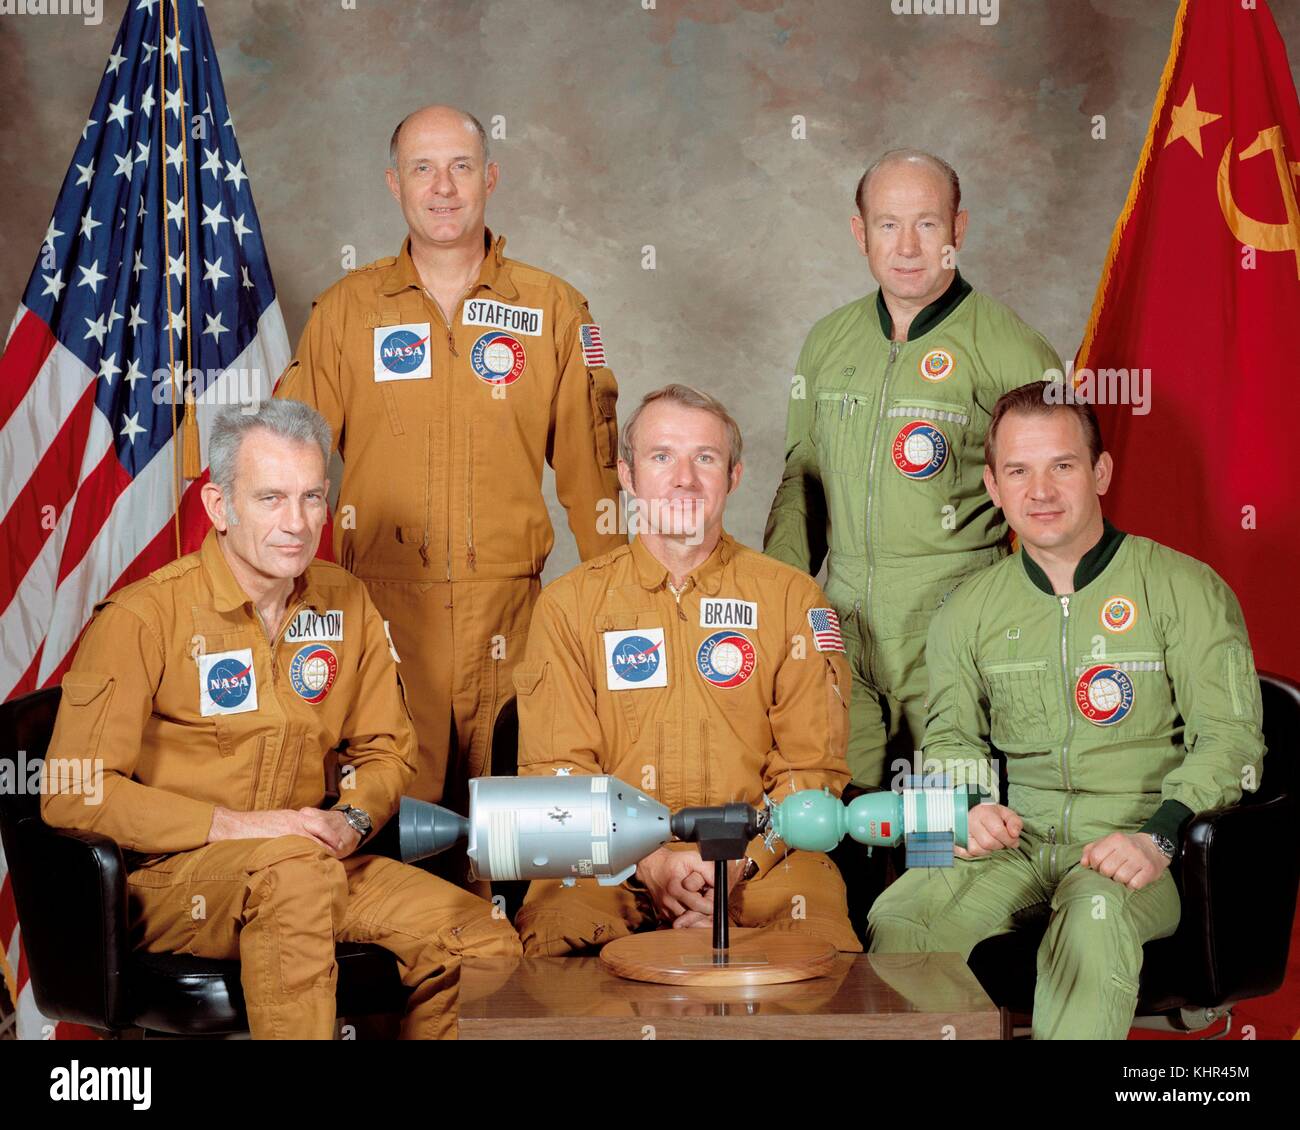 The Apollo-Soyuz crew, from left: American astronauts 'Deke' Slayton, Tom Stafford, Vance Brand, Russian cosmonauts Aleksey Leonov, Valeriy Kubasov pose for a group photo at the Johnson Space Center in Houston, Texas. The mission is to demonstrate that two different spacecraft can dock in space.  (photo by NASA via Planetpix) (photo by NASA via Planetpix) Stock Photo